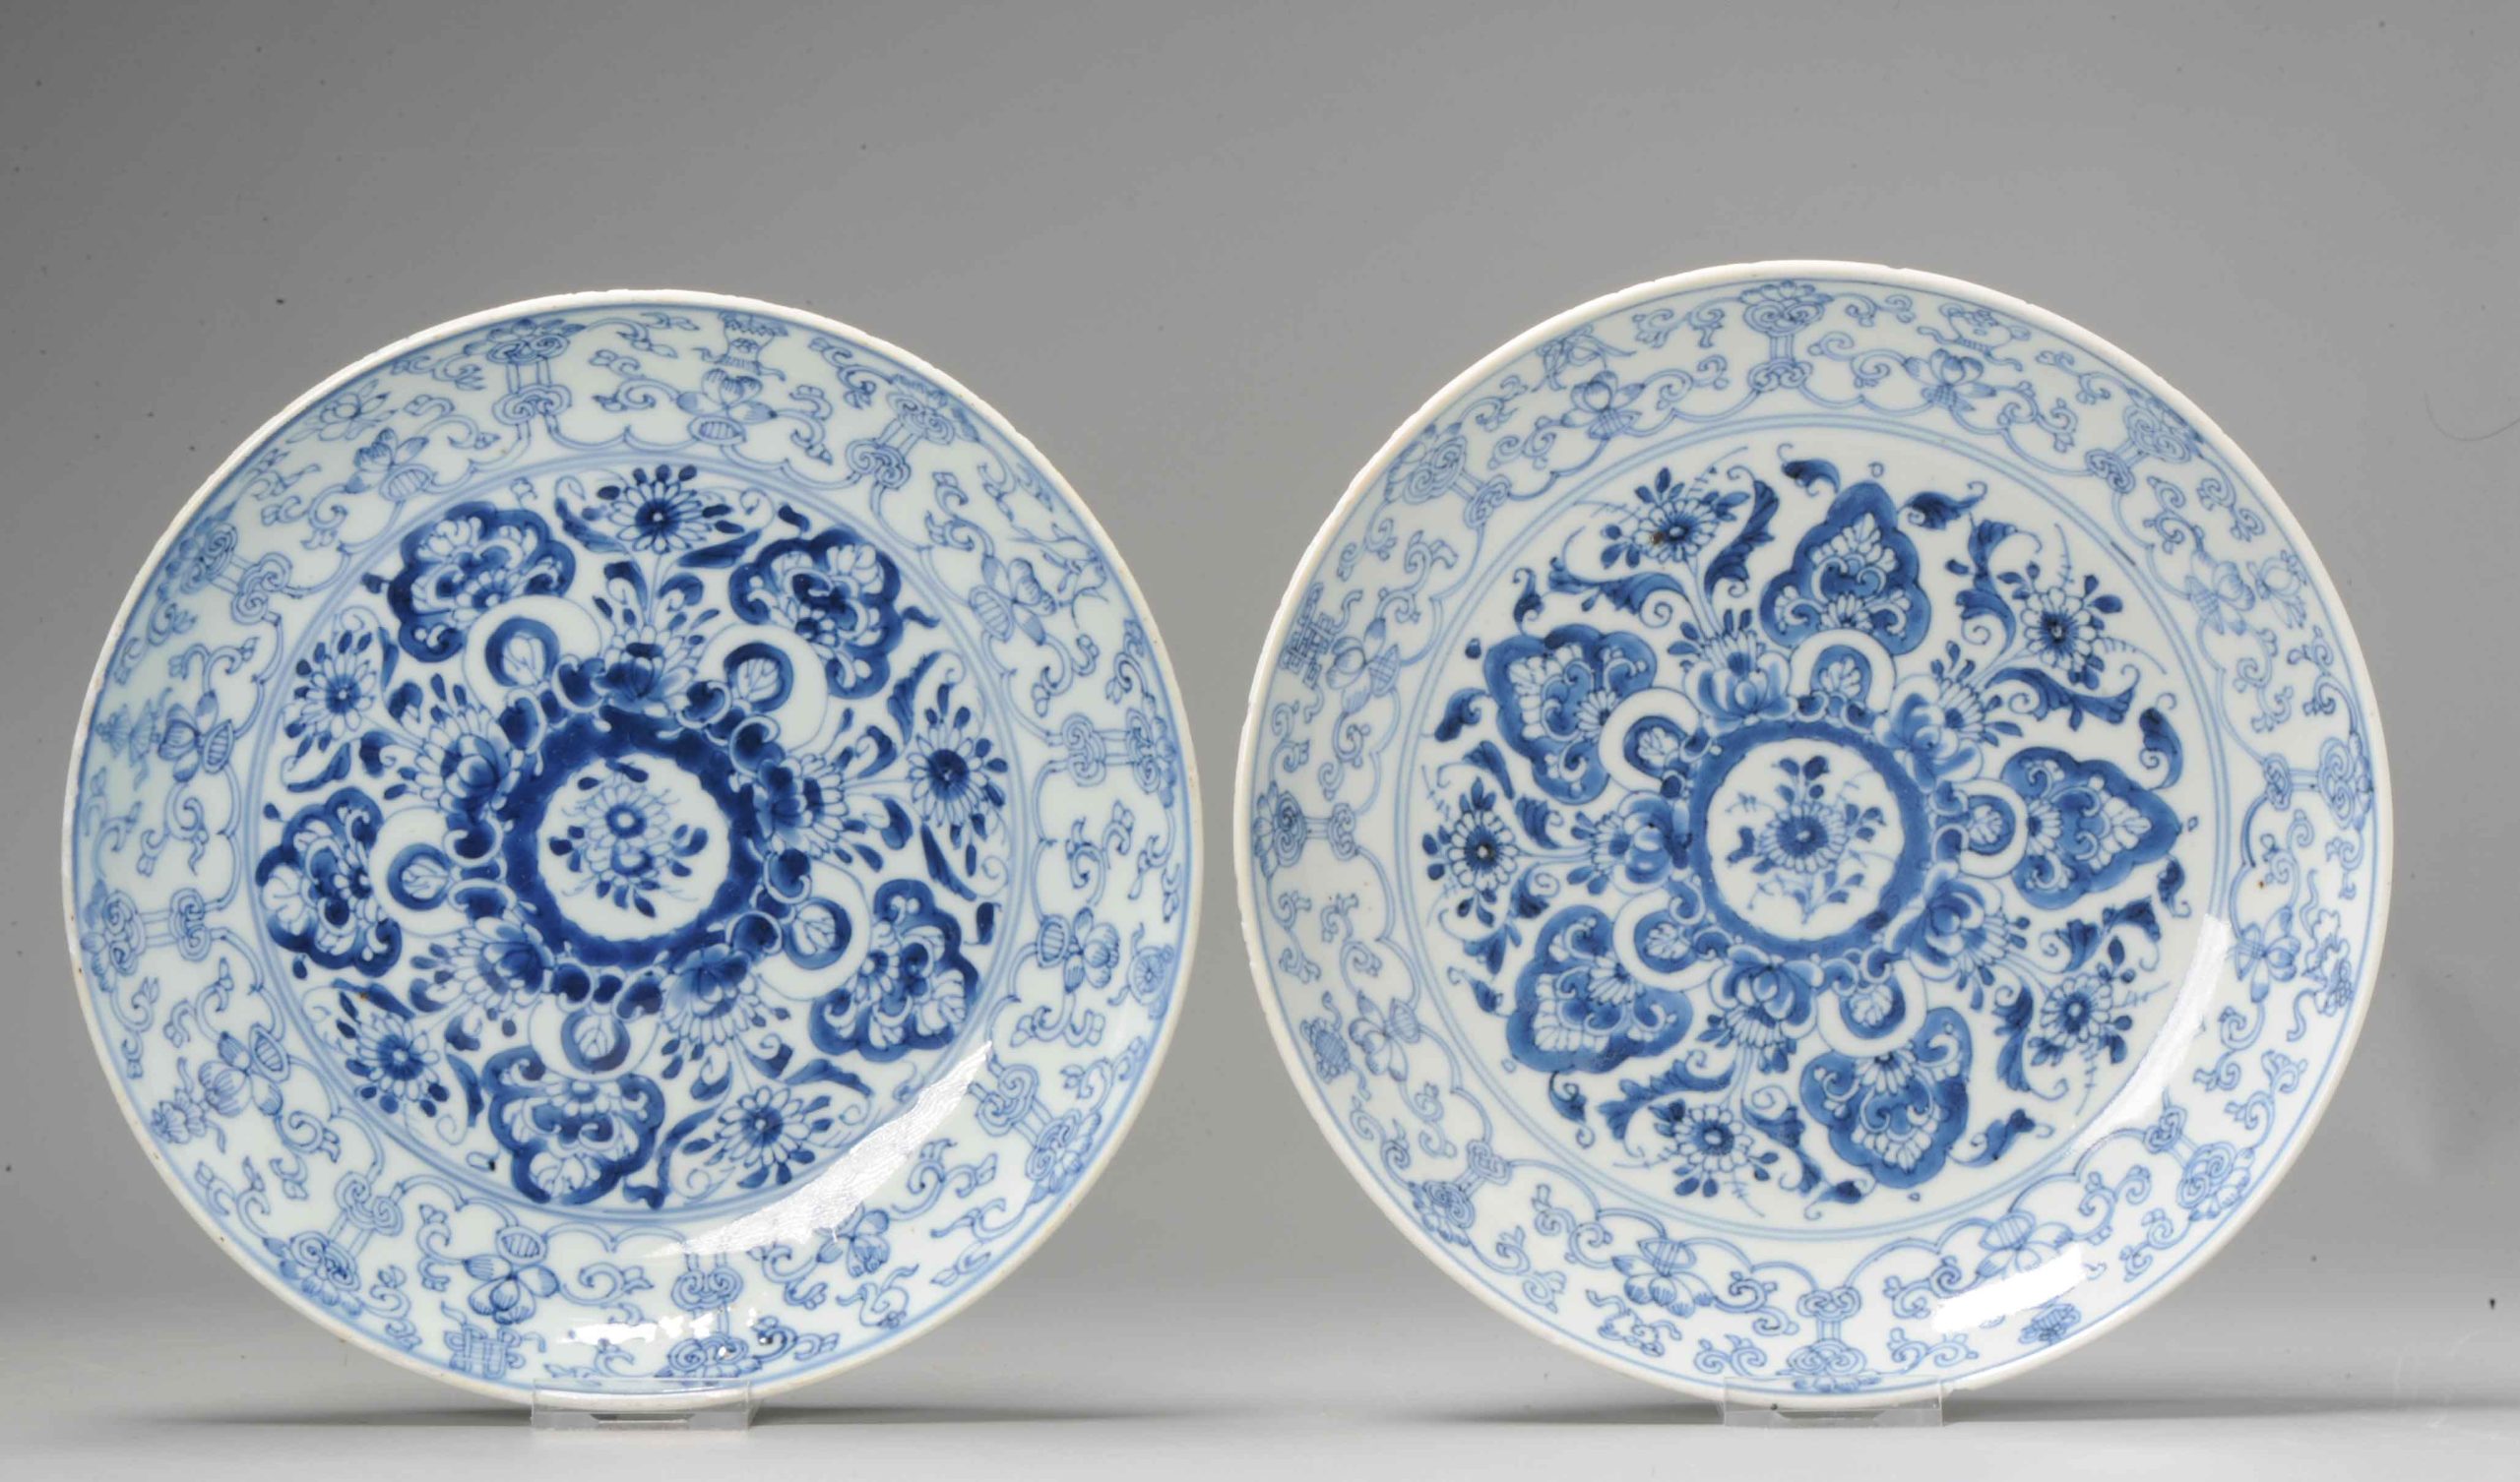 A Rare Pair of Yongzheng period Chinese porcelain Plates for the SE Asian market